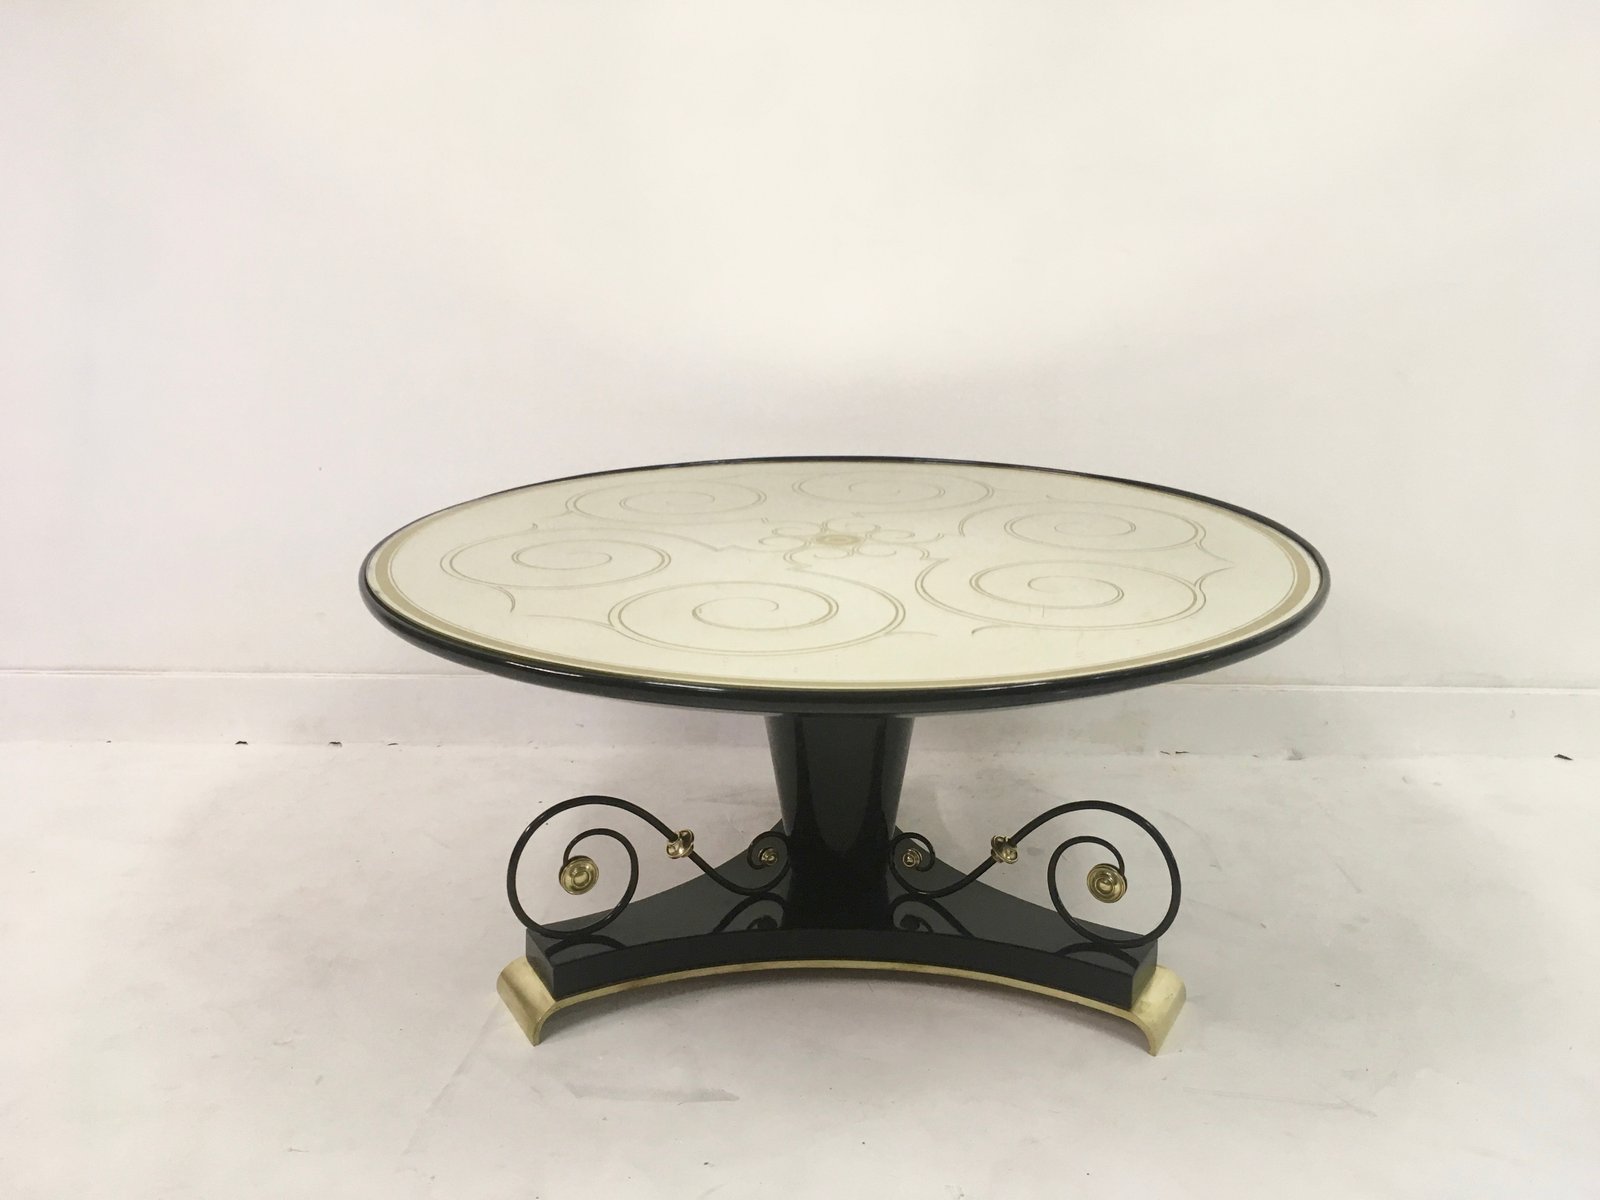 Vintage French Black Lacquer Verre Glomis Gueridon Coffee Table